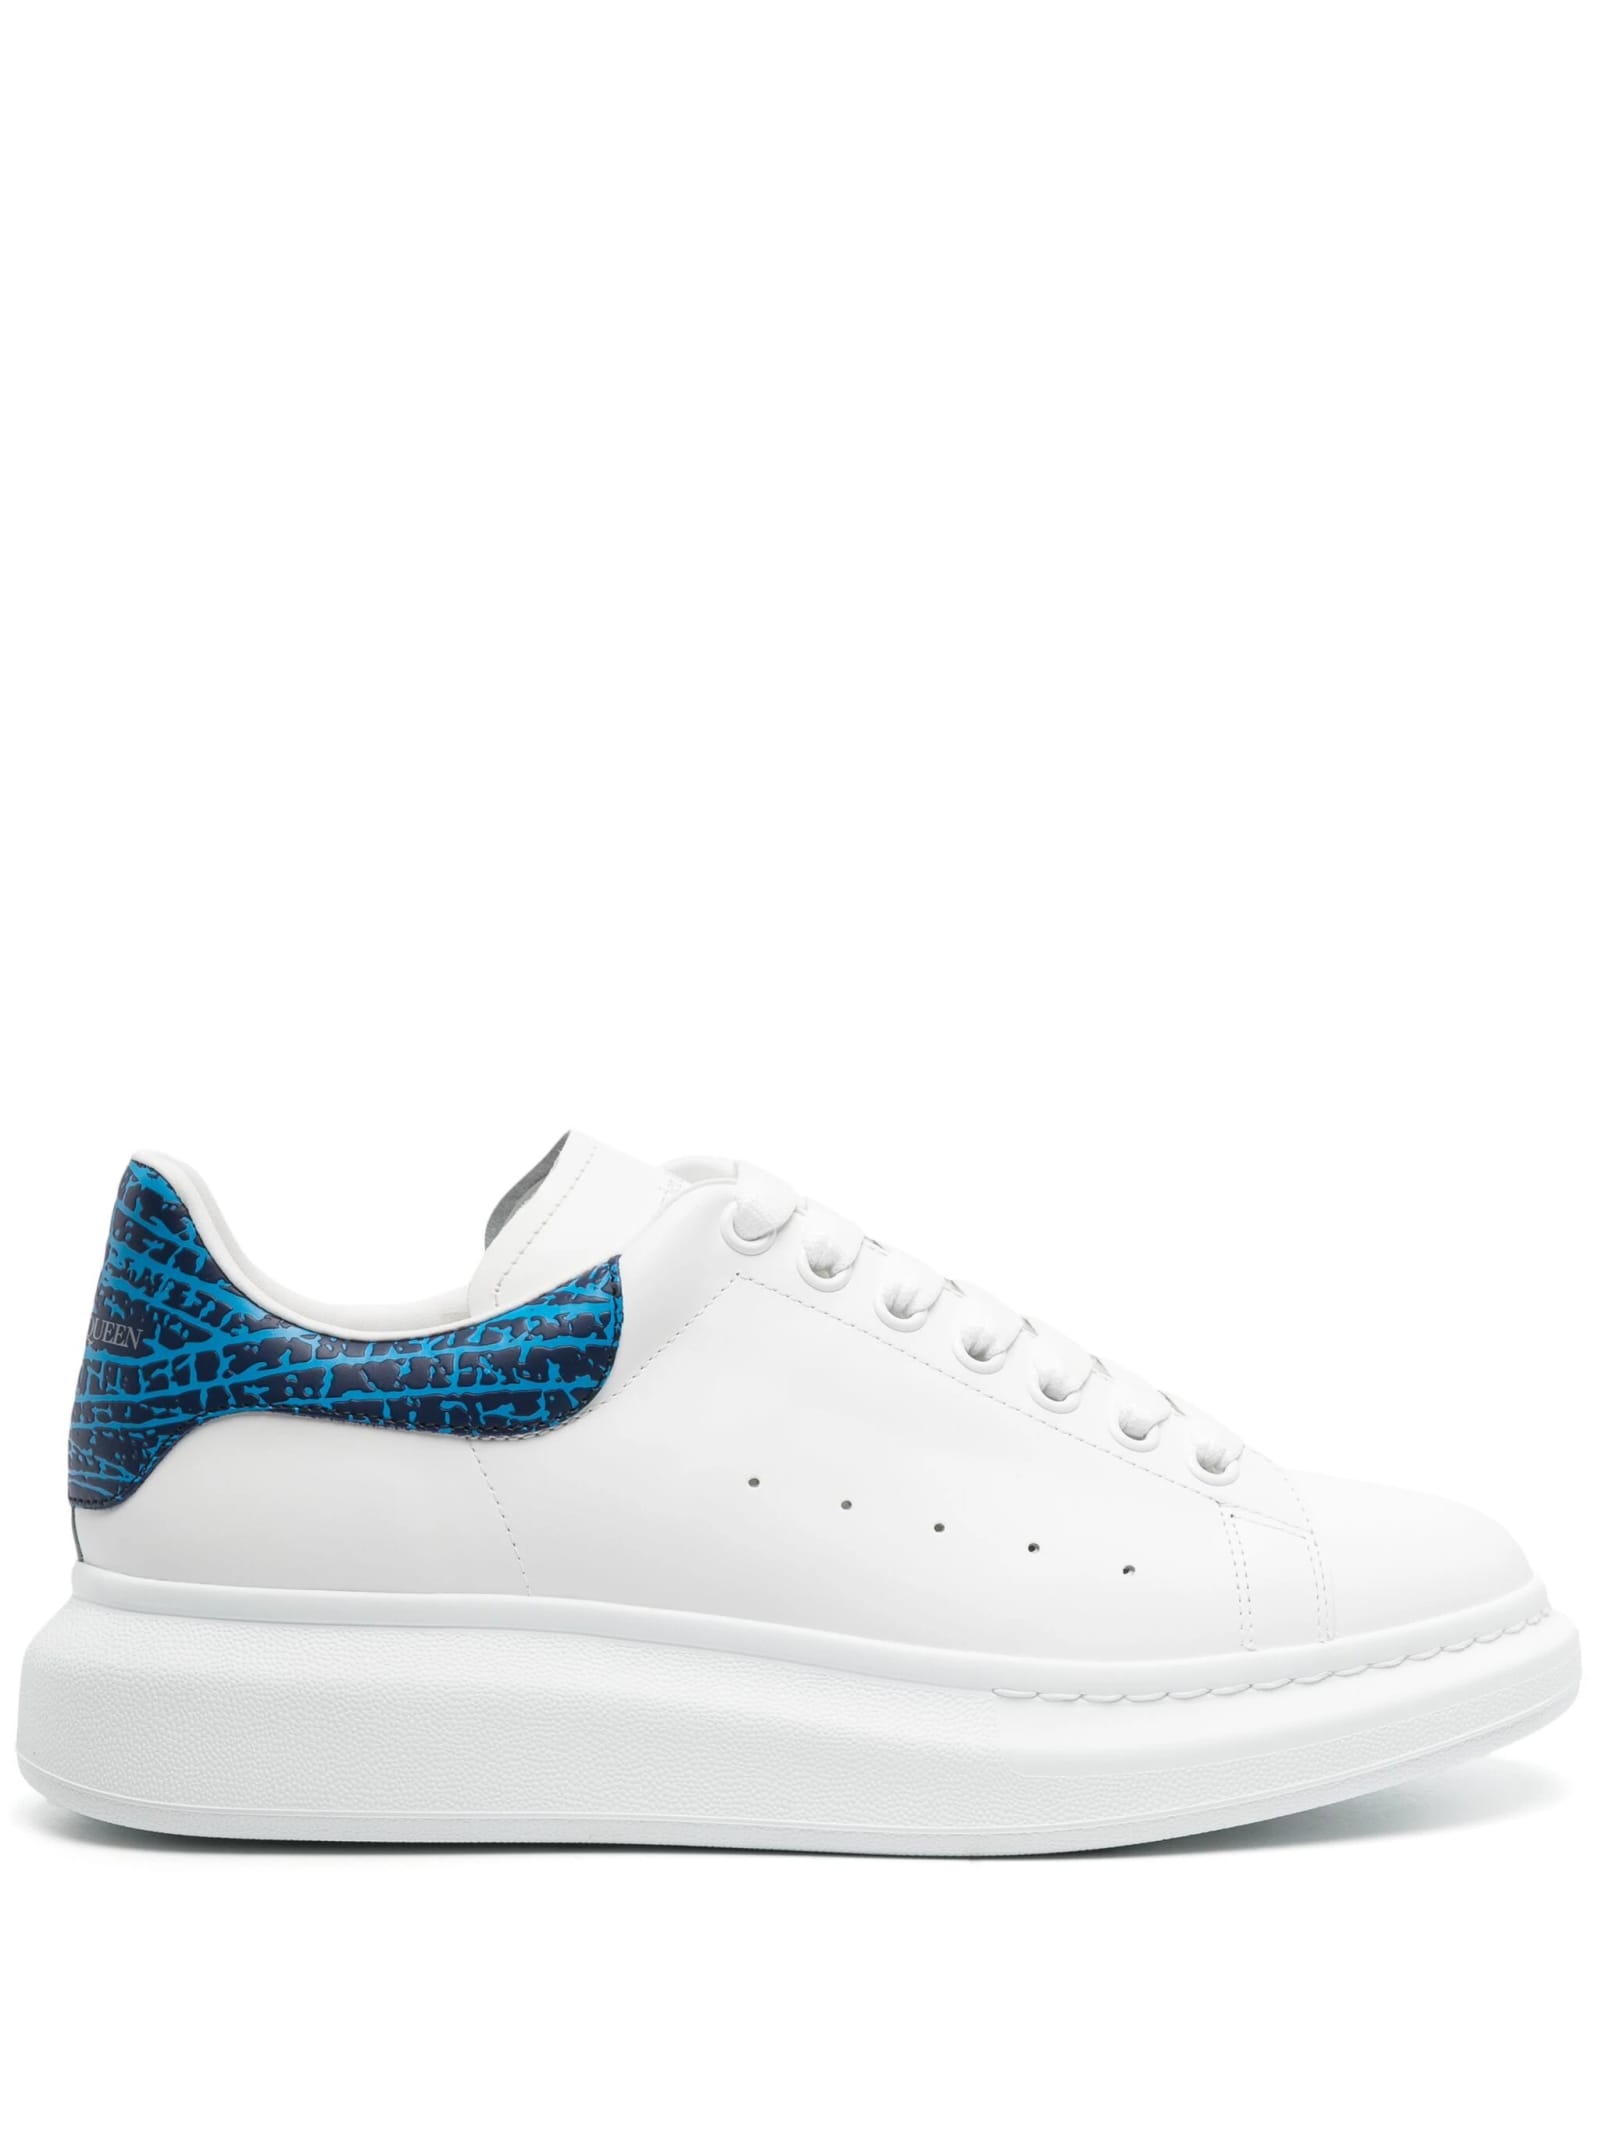 ALEXANDER MCQUEEN LAPIS LAZULI BLUE AND WHITE OVERSIZED SNEAKERS